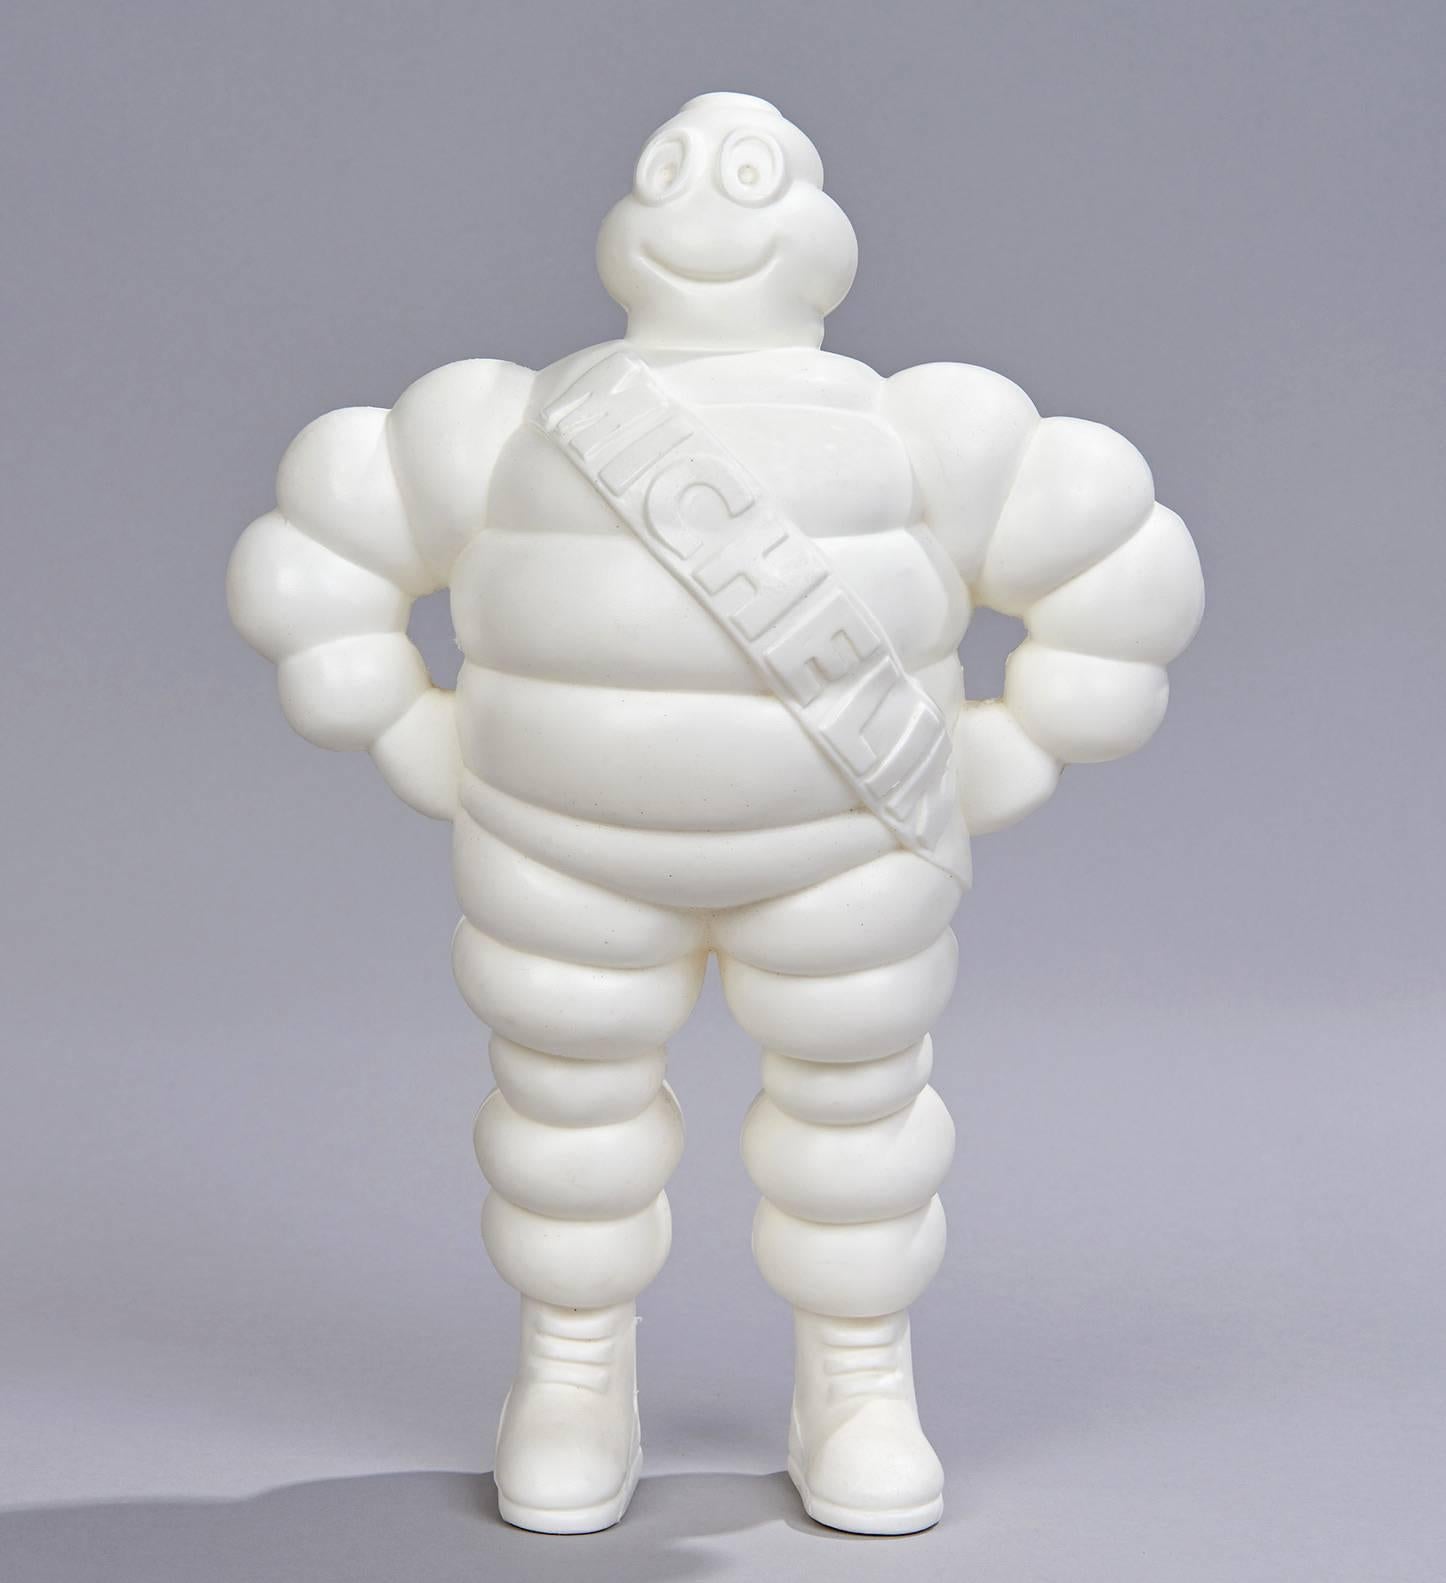 Bibendum, the Michelin Man, is one of the oldest trademarks in the world (he was born in 1894) and one of the best-loved. Three-dimensional Bibendum figures of all sizes were used throughout the 1900s to promote Michelin's products, from their